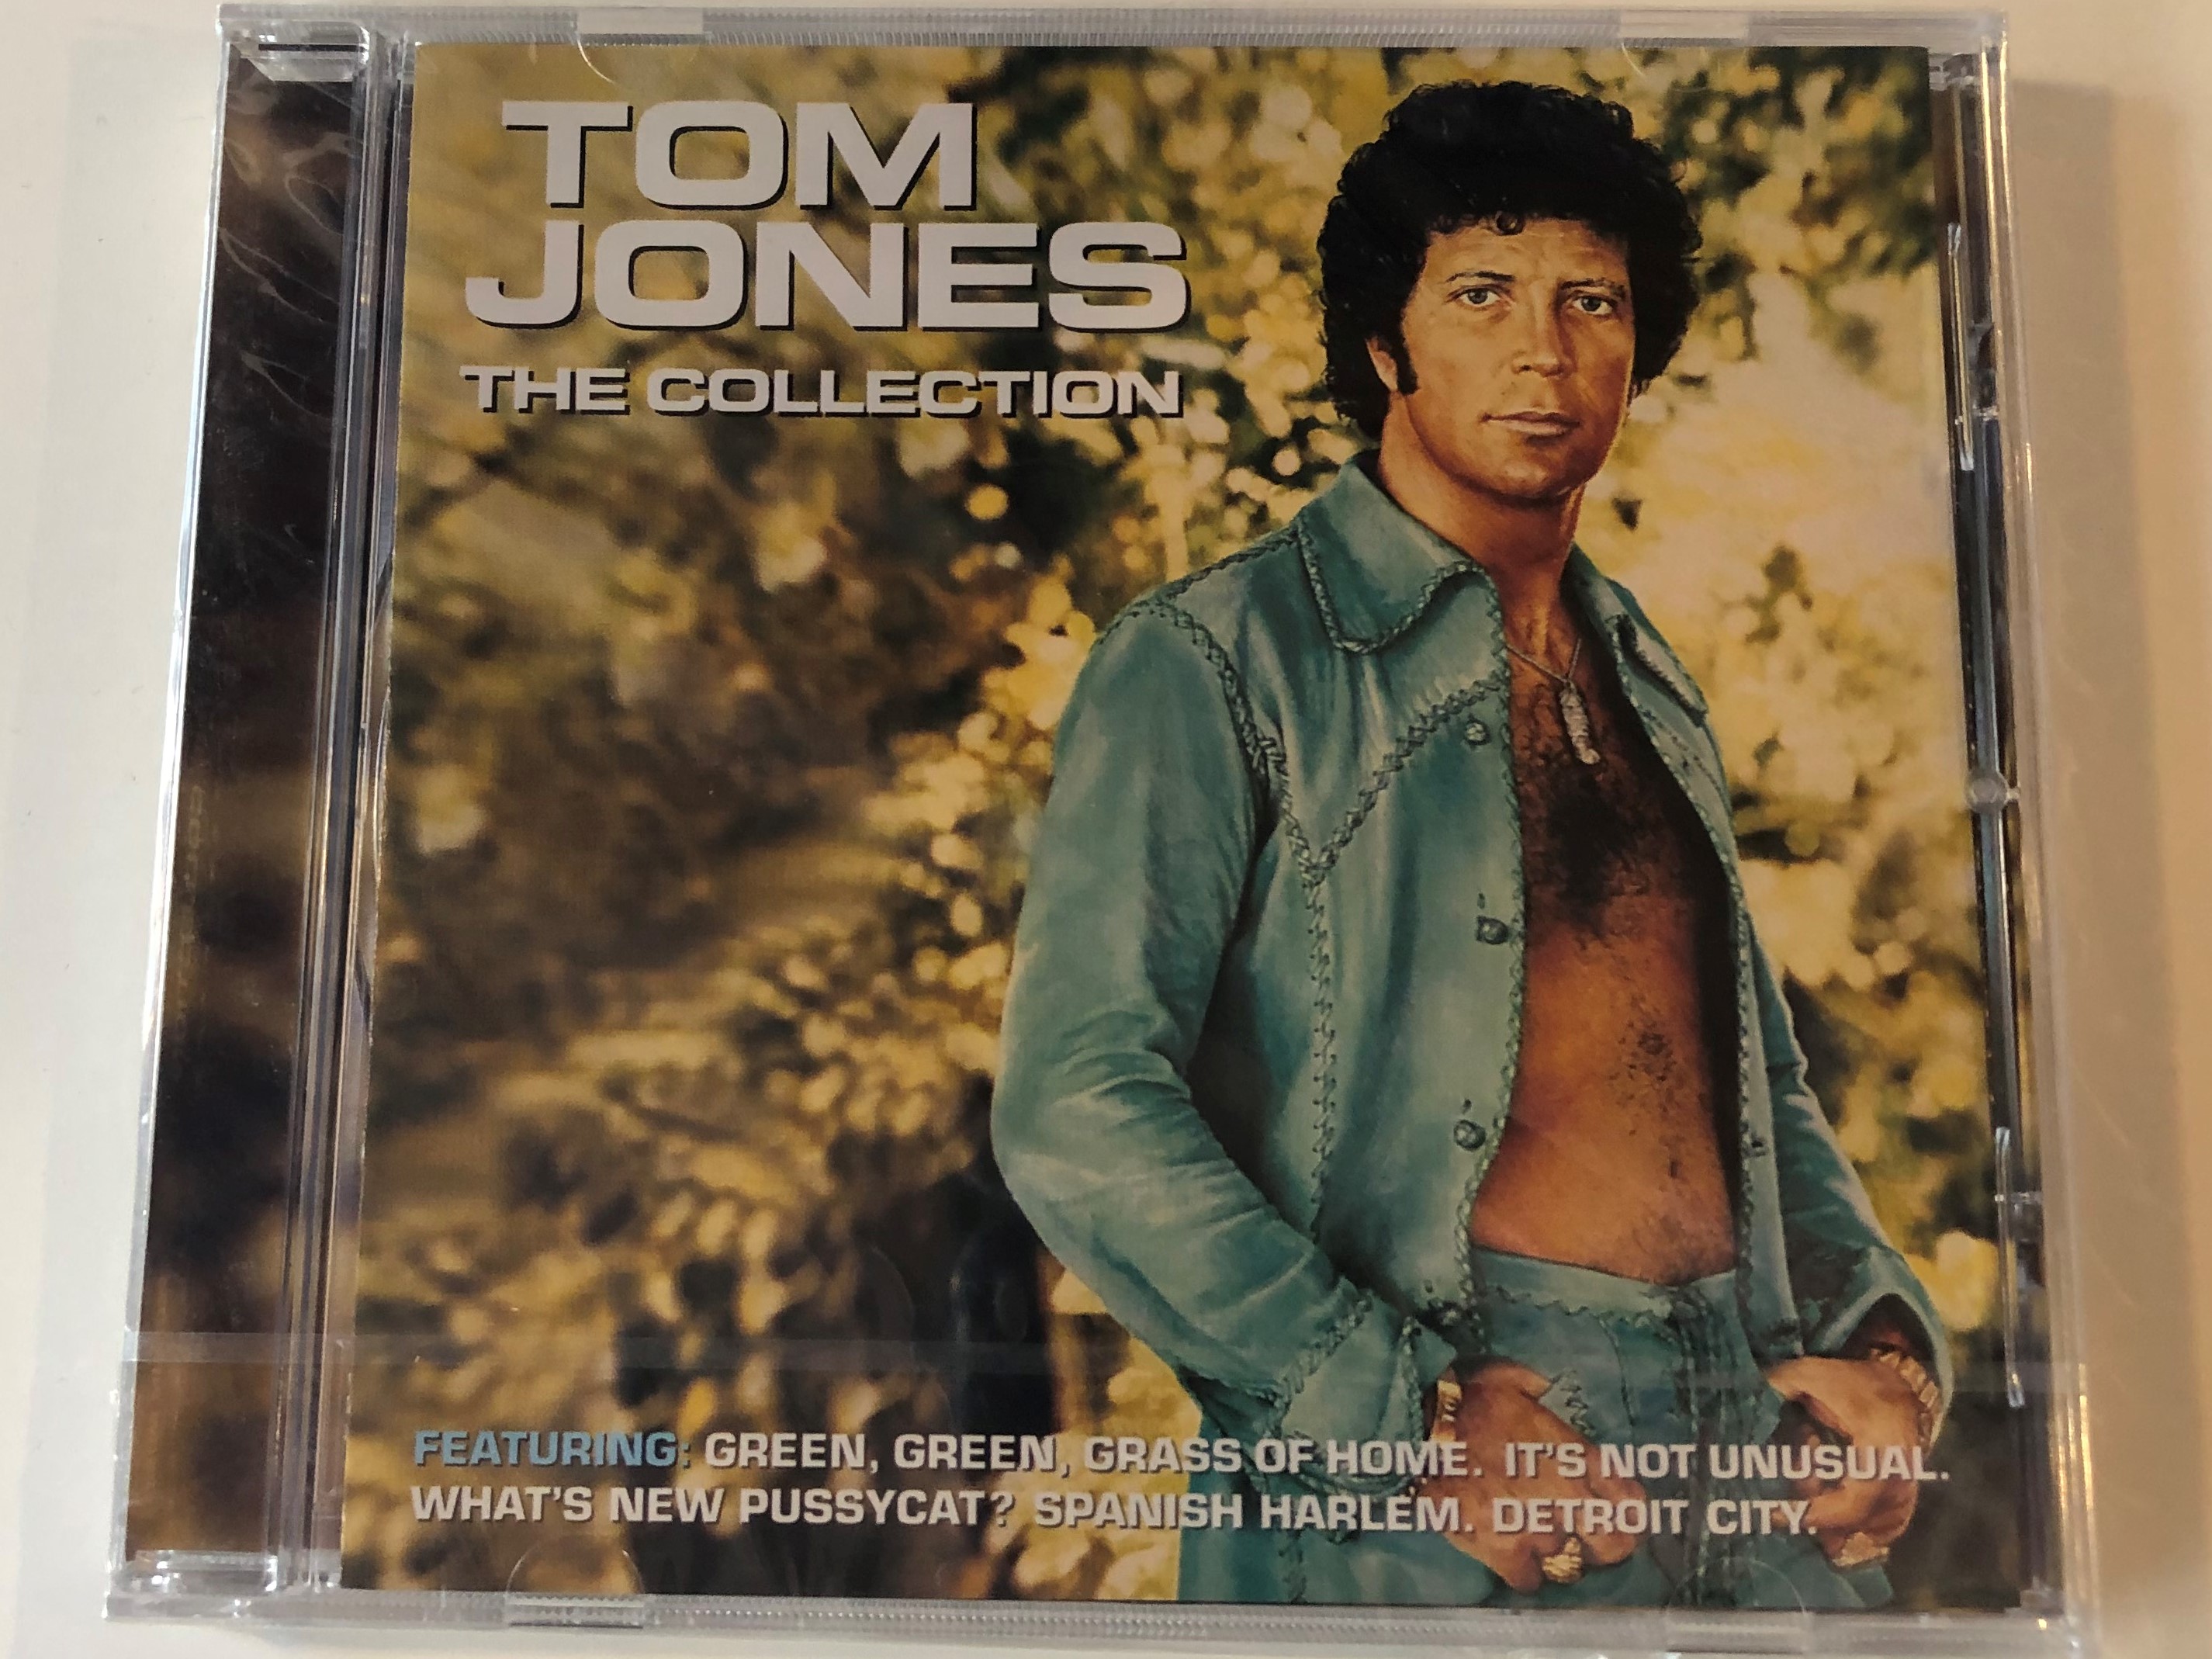 tom-jones-the-collection-featuring-green-green-grass-of-home-it-s-not-unusual-what-s-new-pussycat-spanish-harlem-detroit-city-spectrum-music-audio-cd-1995-551-520-2-1-.jpg